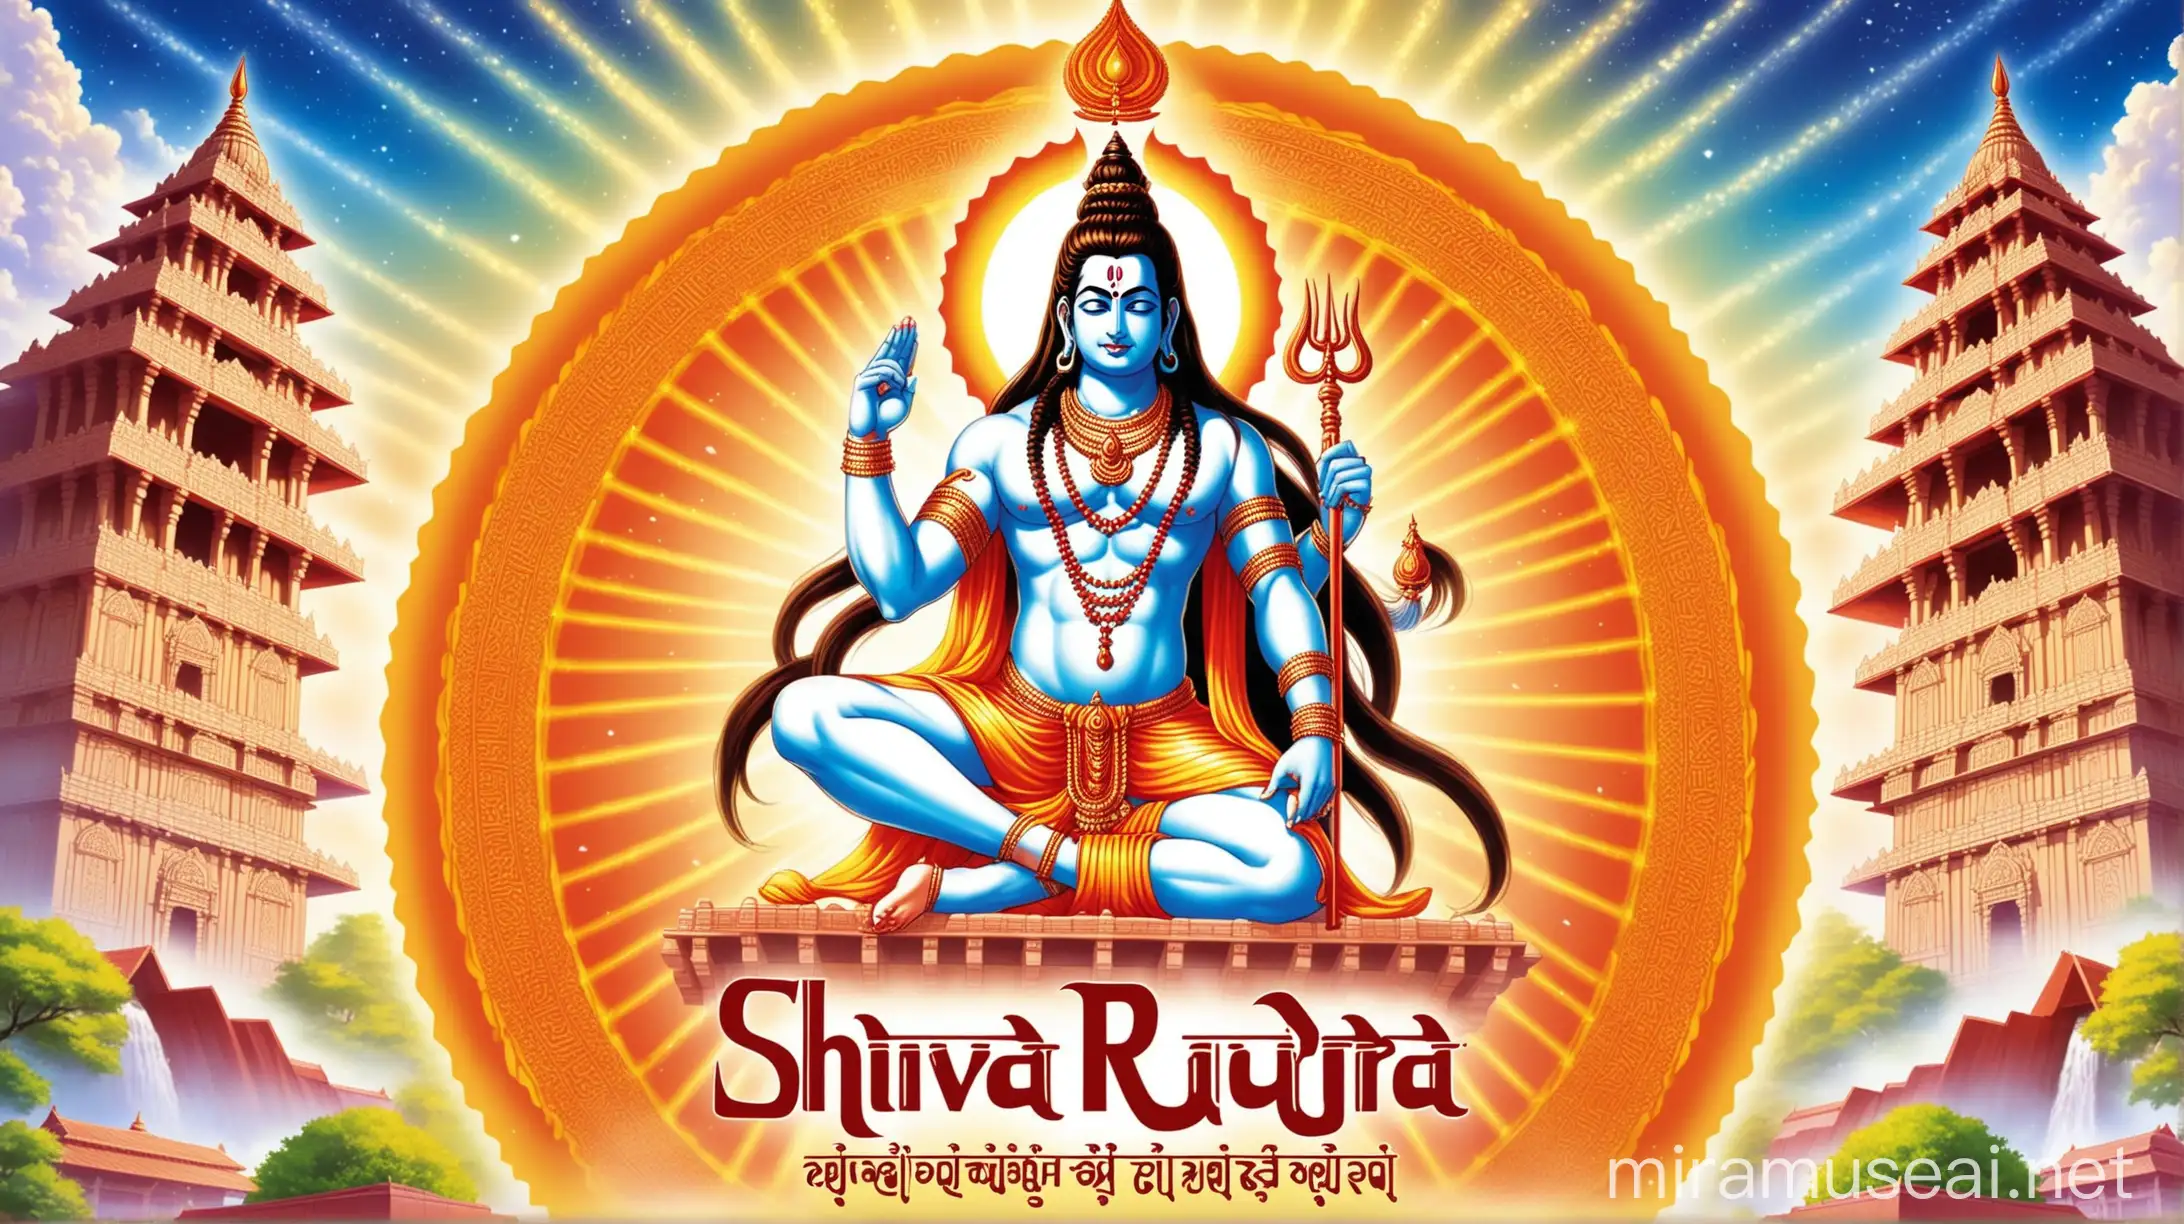 Make a Bollywood type movie poster with a picture of Lord Shiva And Lord Gayatri Devi inside it, a beautiful garden and a temple  Poster title : " Shiva Rudra Gayatri Mantra "
